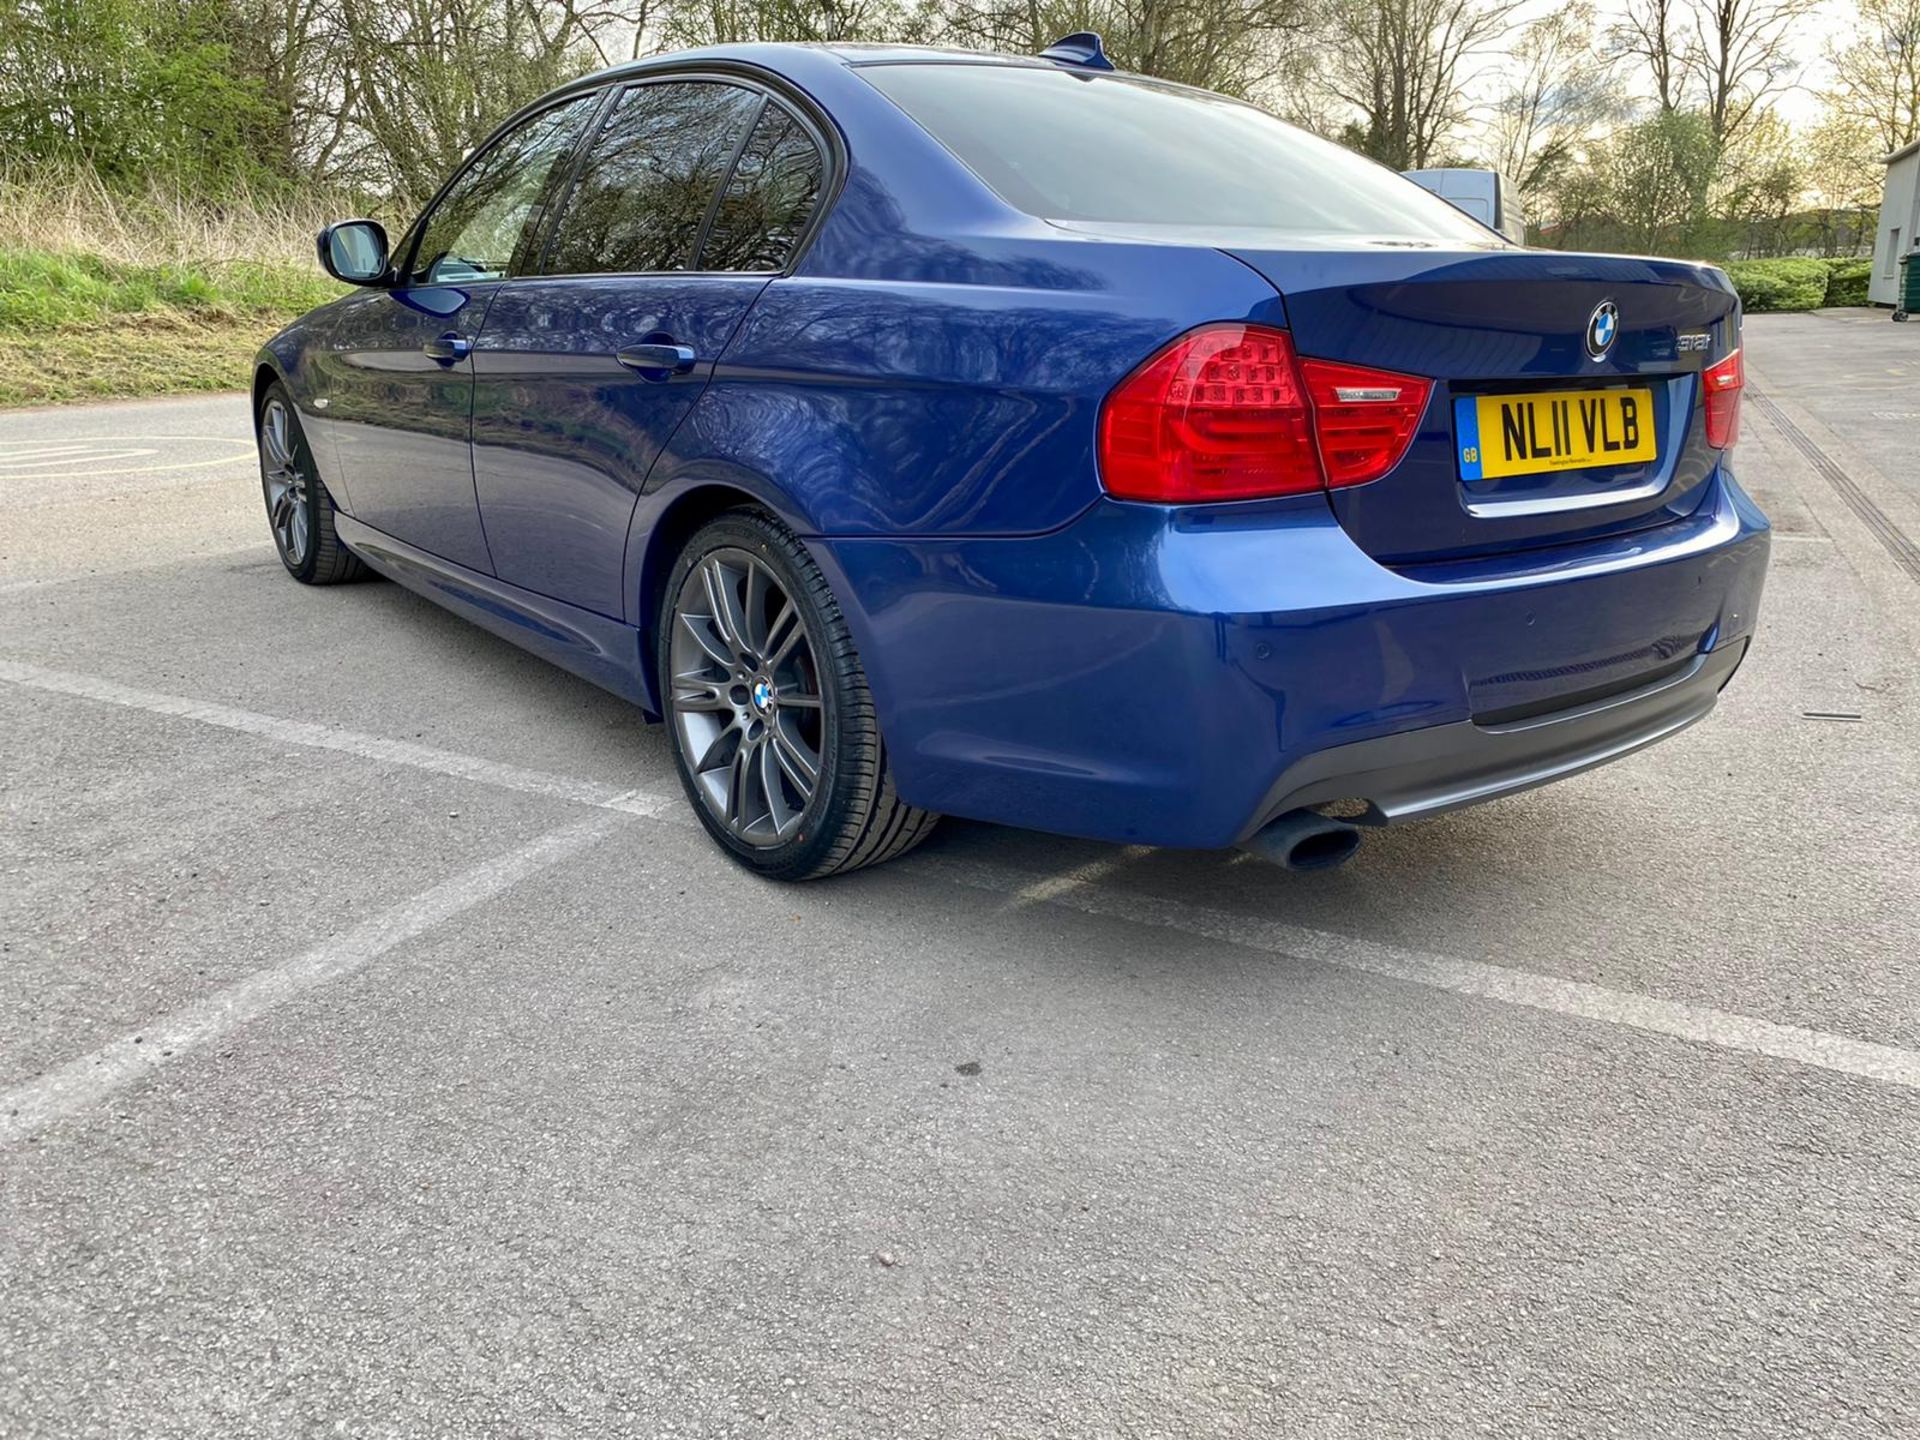 2011 BMW 318I SPORT PLUS EDITION BLUE SALOON, NEW TMING CHAIN, NEW 2 PIECE CLUTCH KIT *NO VAT* - Image 4 of 5